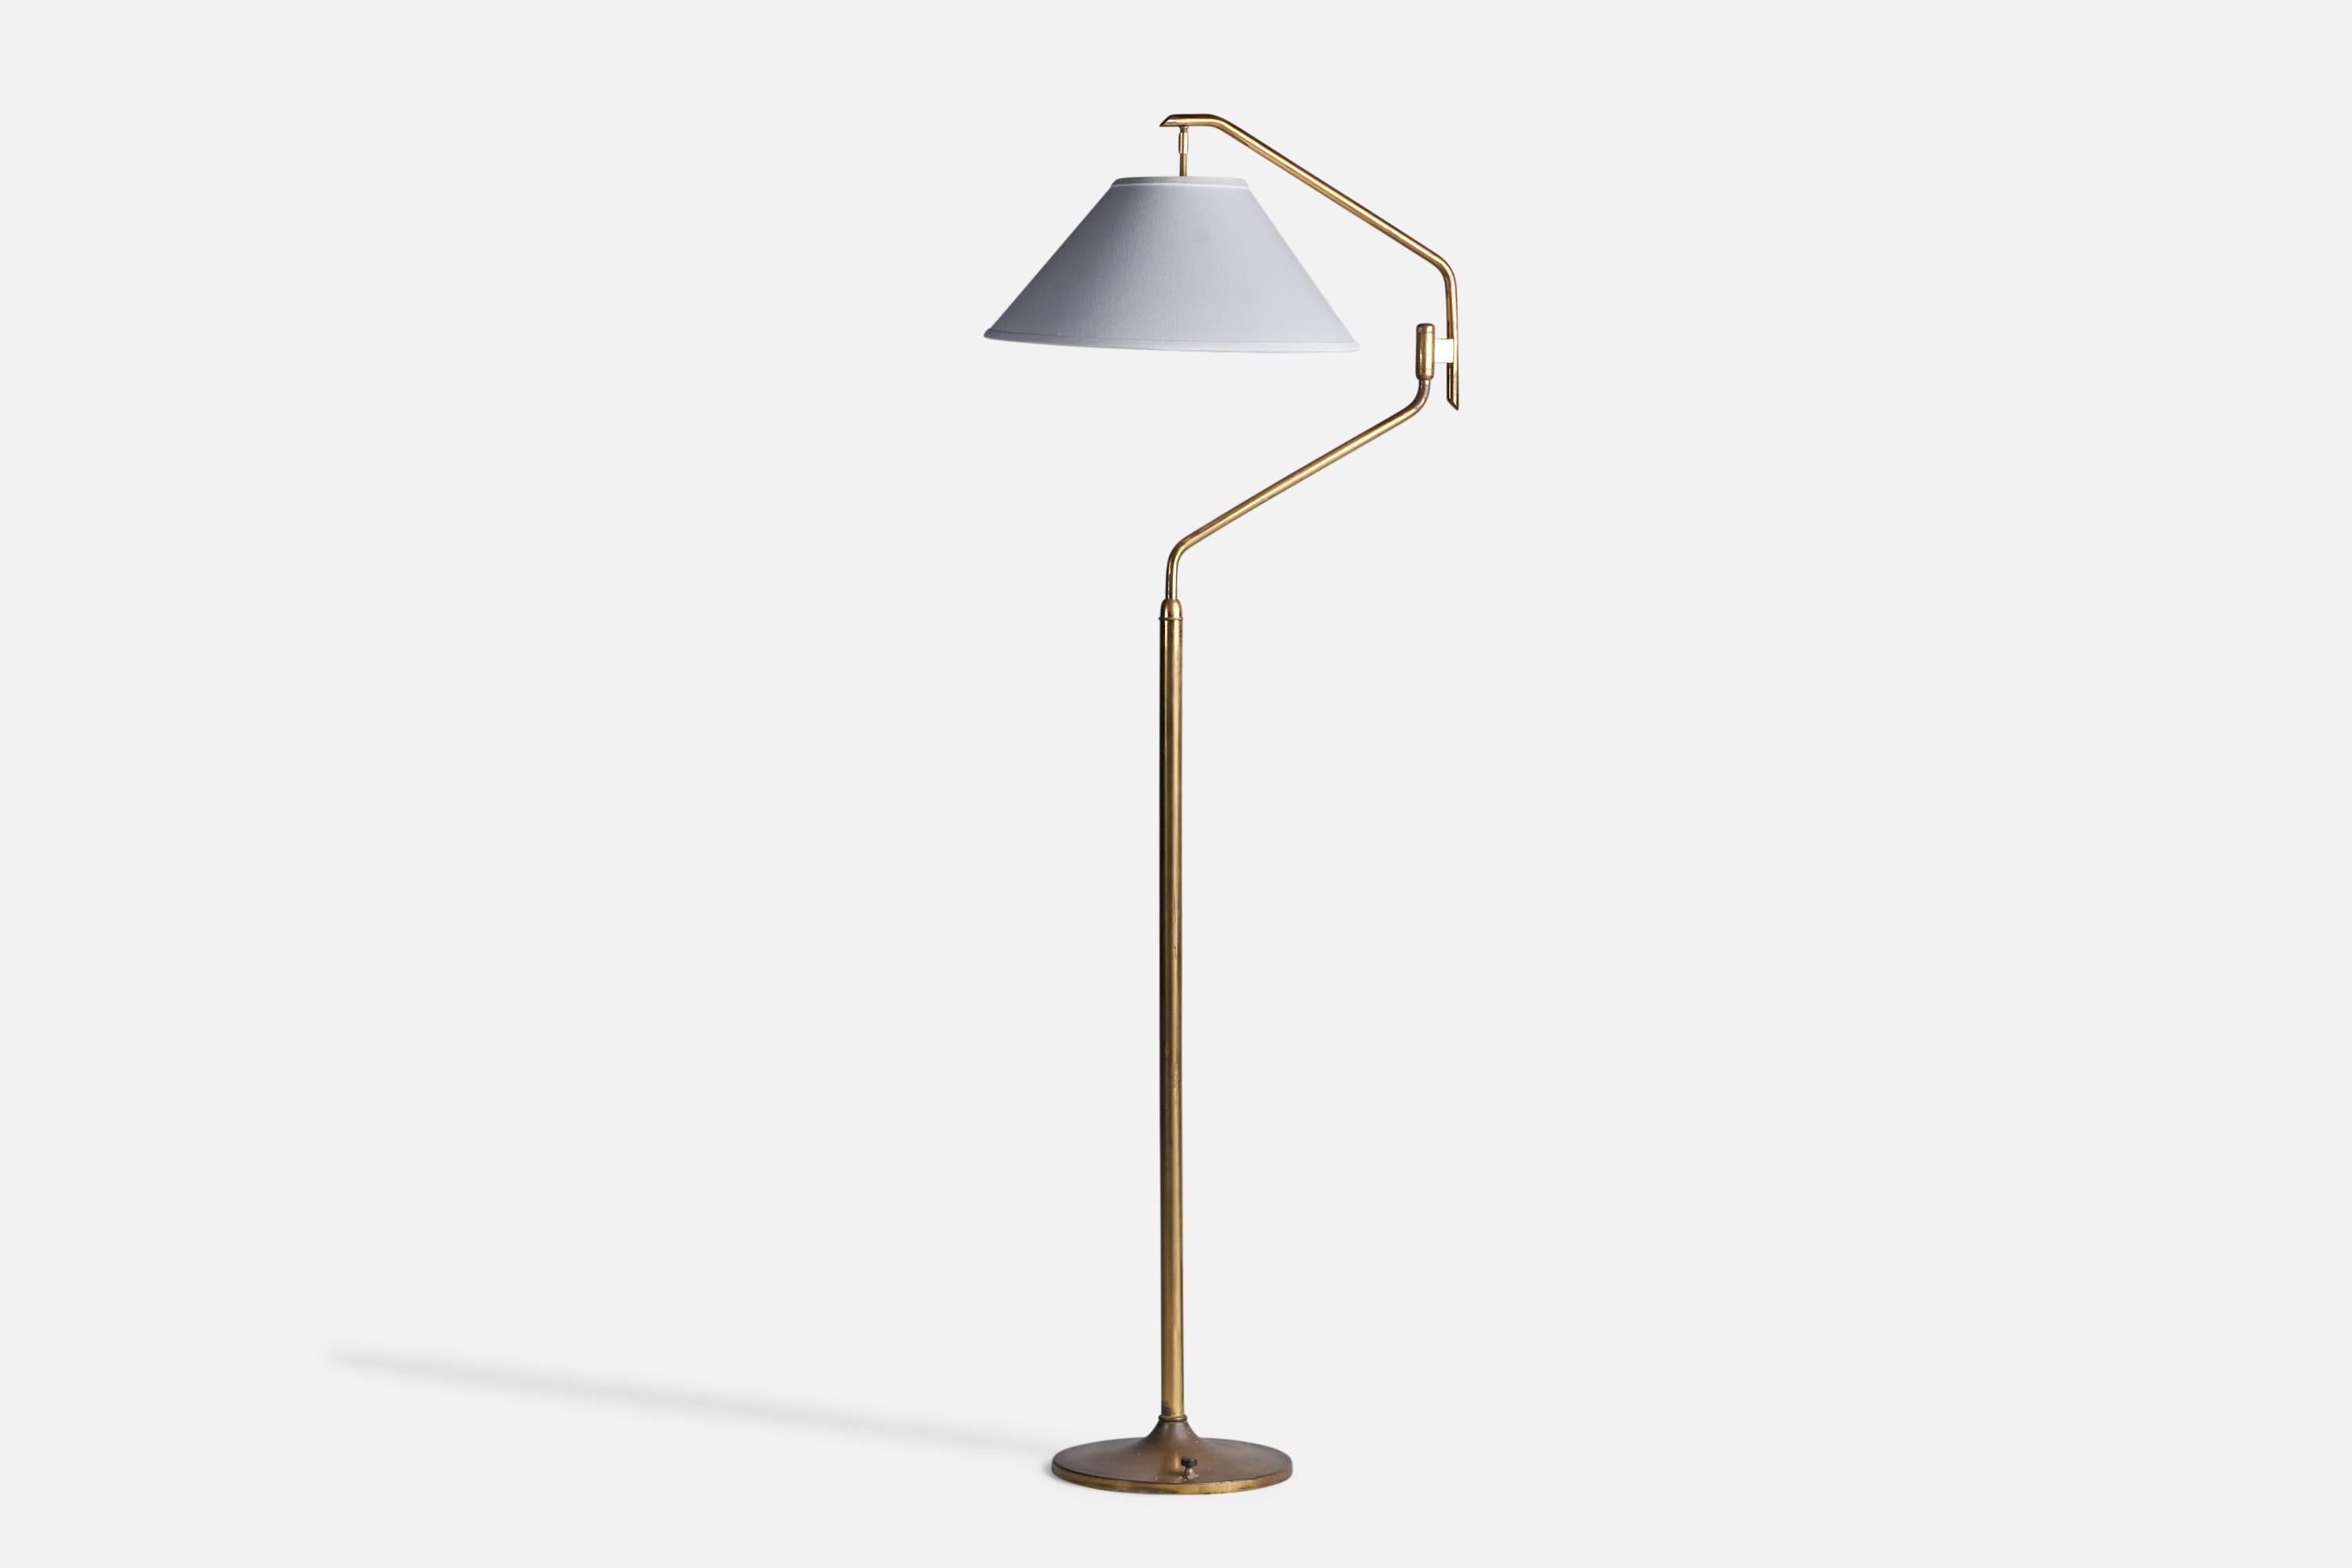 An adjustable brass and white fabric floor lamp, designed and produced in Italy, c. 1940s.

Overall Dimensions (inches): 67